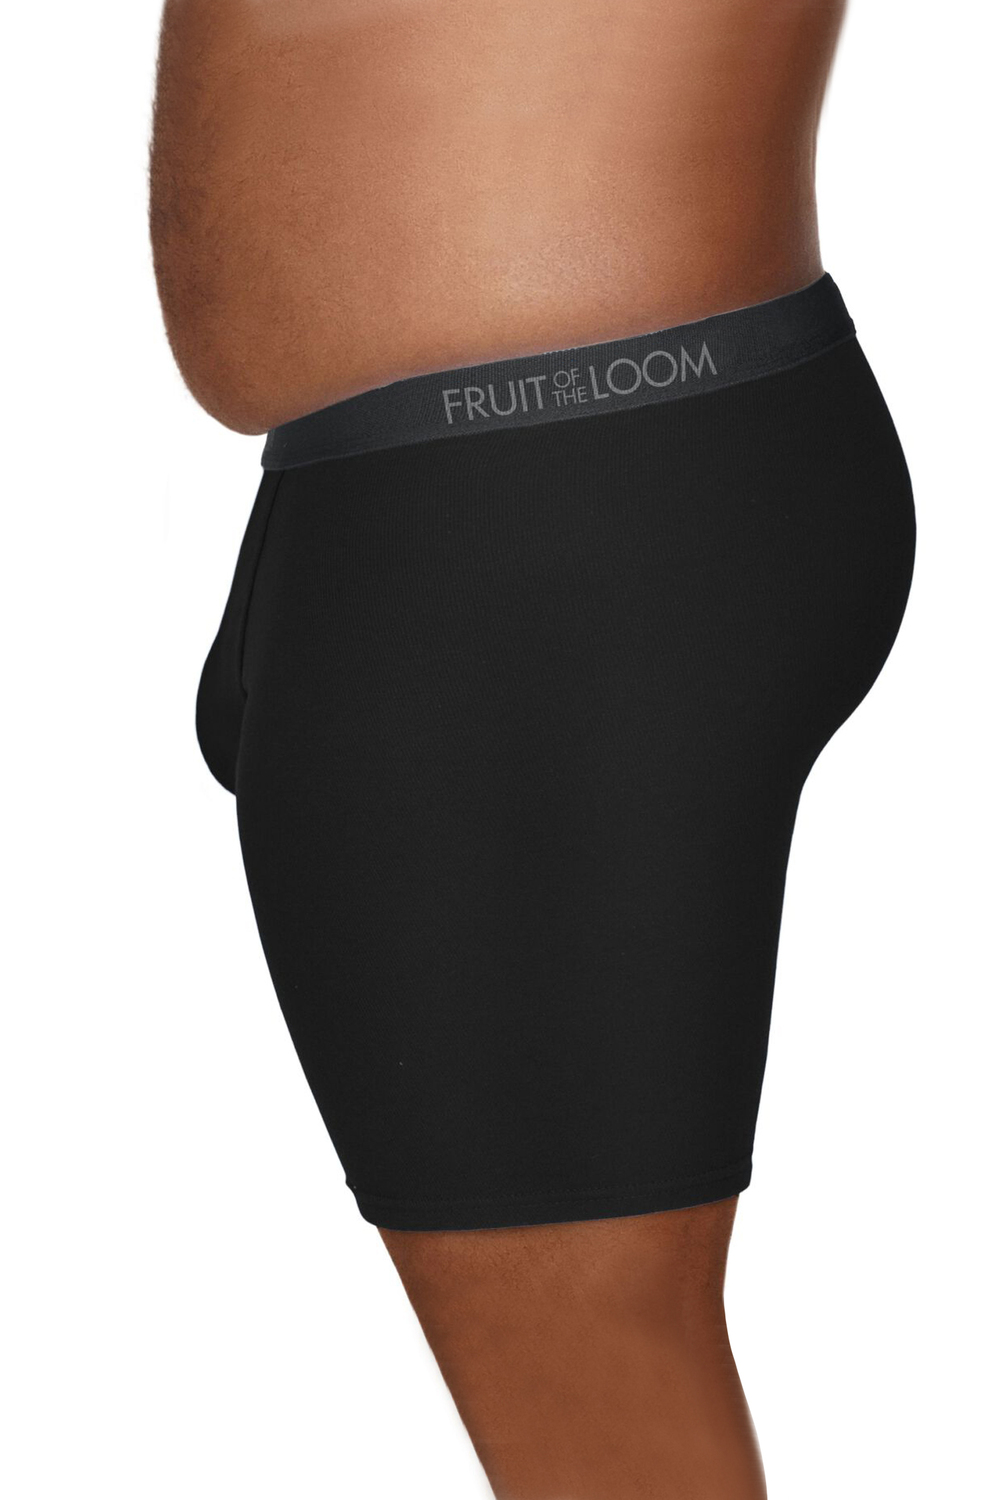 Fruit of the Loom - Tag-free CoolZone Fly boxer briefs, pk. of 3 - Plus Size.  Colour: black. Size: 2xl